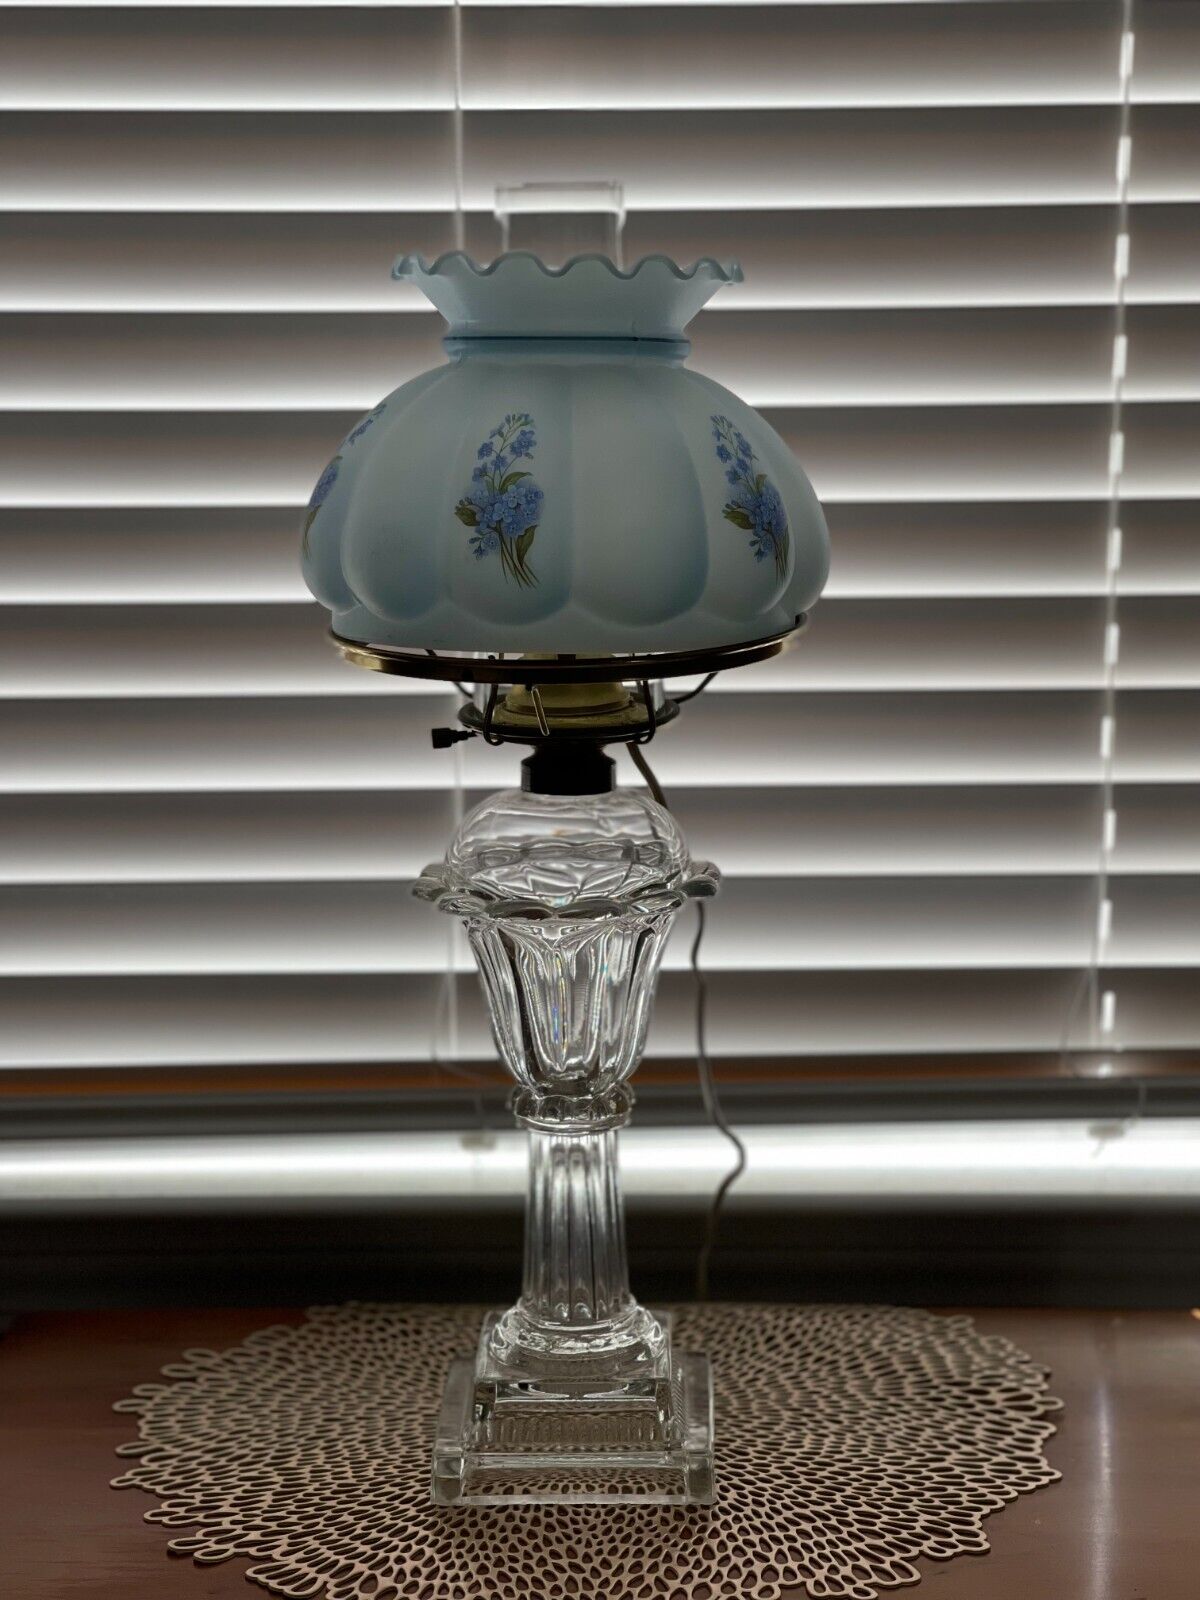 Antique: Pair of 19th Century Oil Lamps (Electrified) with Blue Shades 